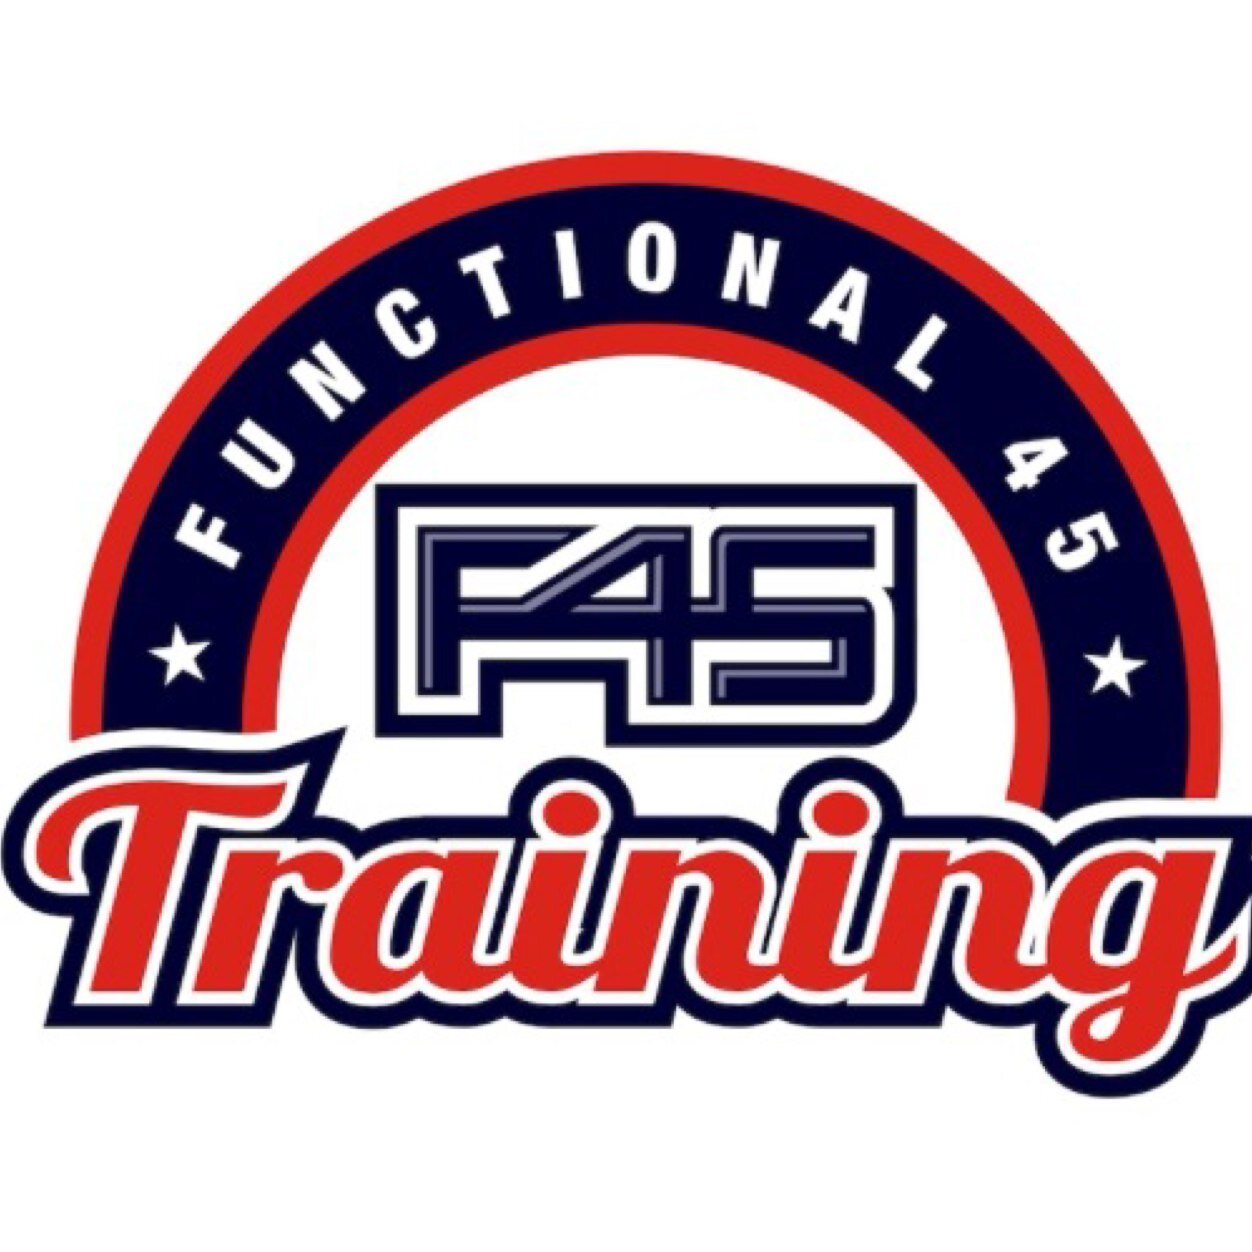 UNIQUE, INNOVATIVE AND FUN FUNCTIONAL TRAINING. LIFE CHANGING! RUN BY PRO ATHLETE @daveharvey17 I:@F45TRAININGCASTLEHILL E:dharvey@f45training.com.au